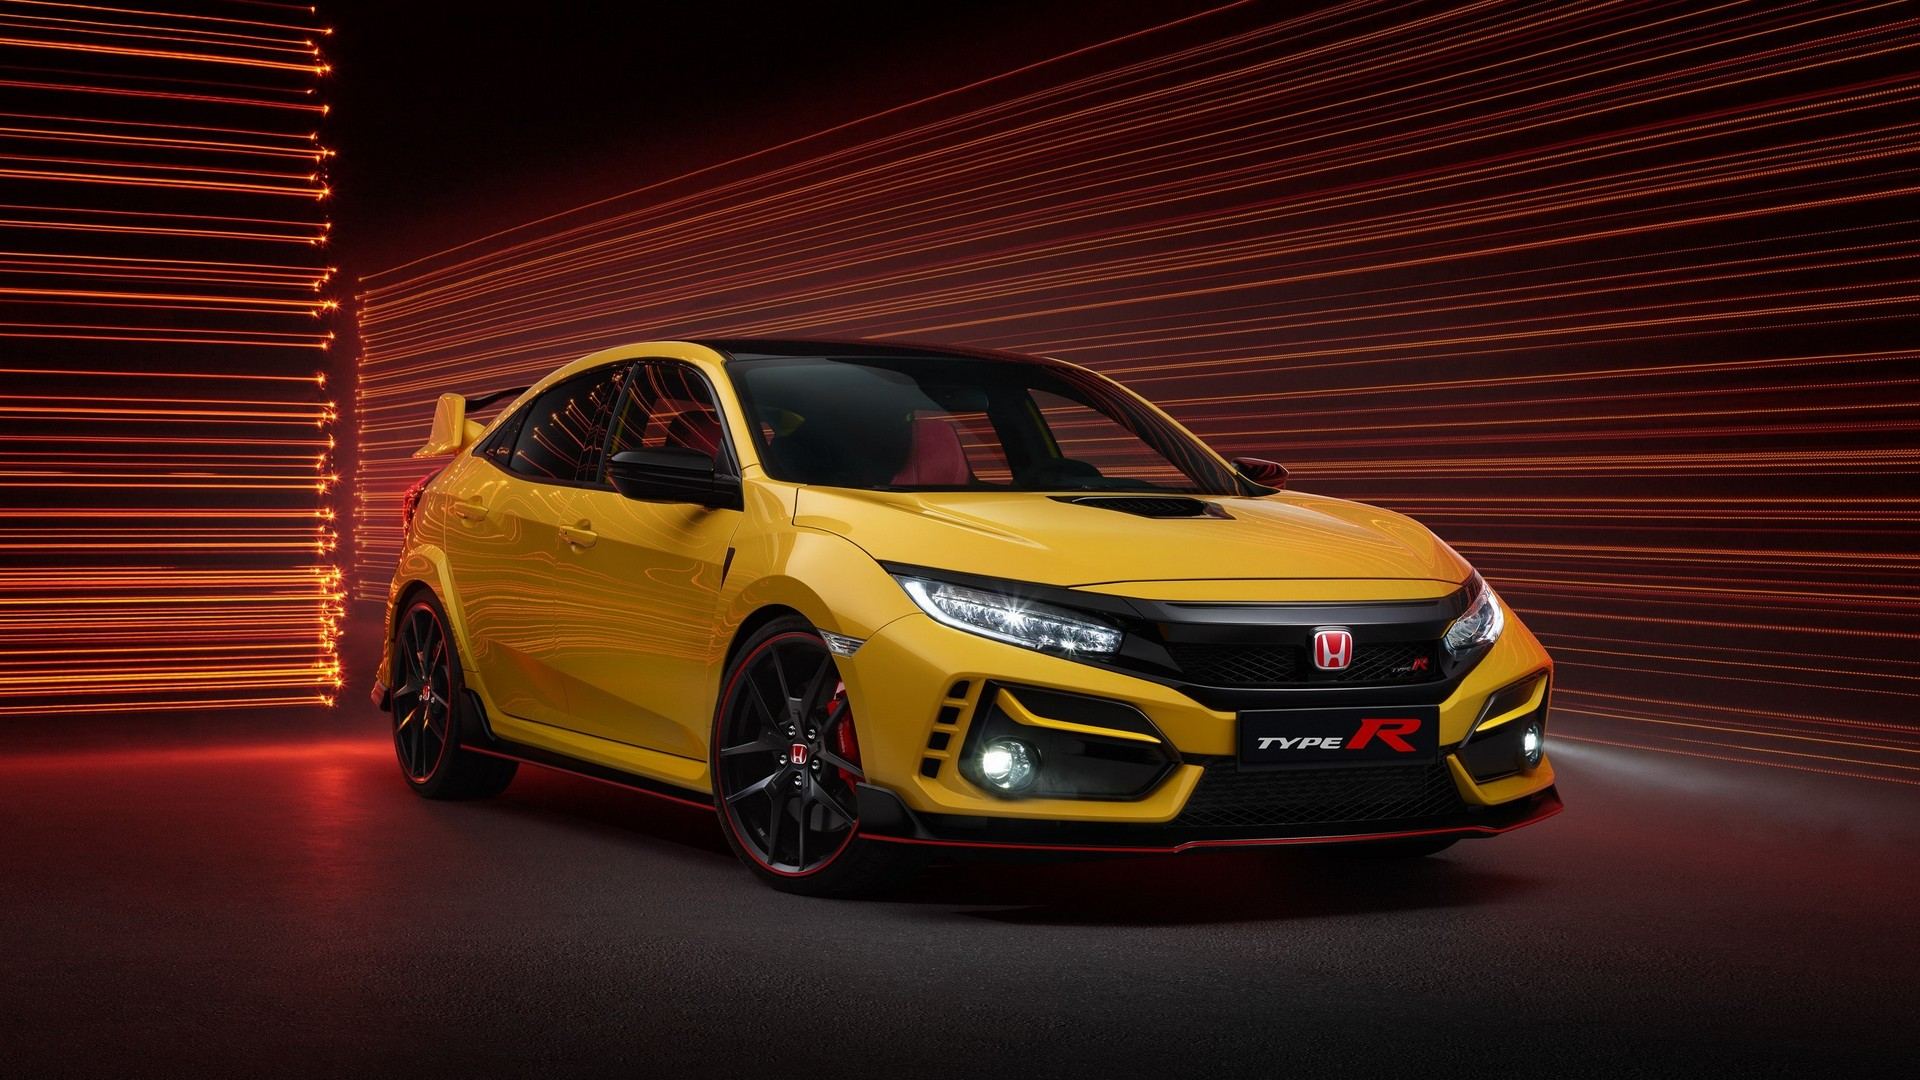 Civic Type R Limited Edition 2020 (3)